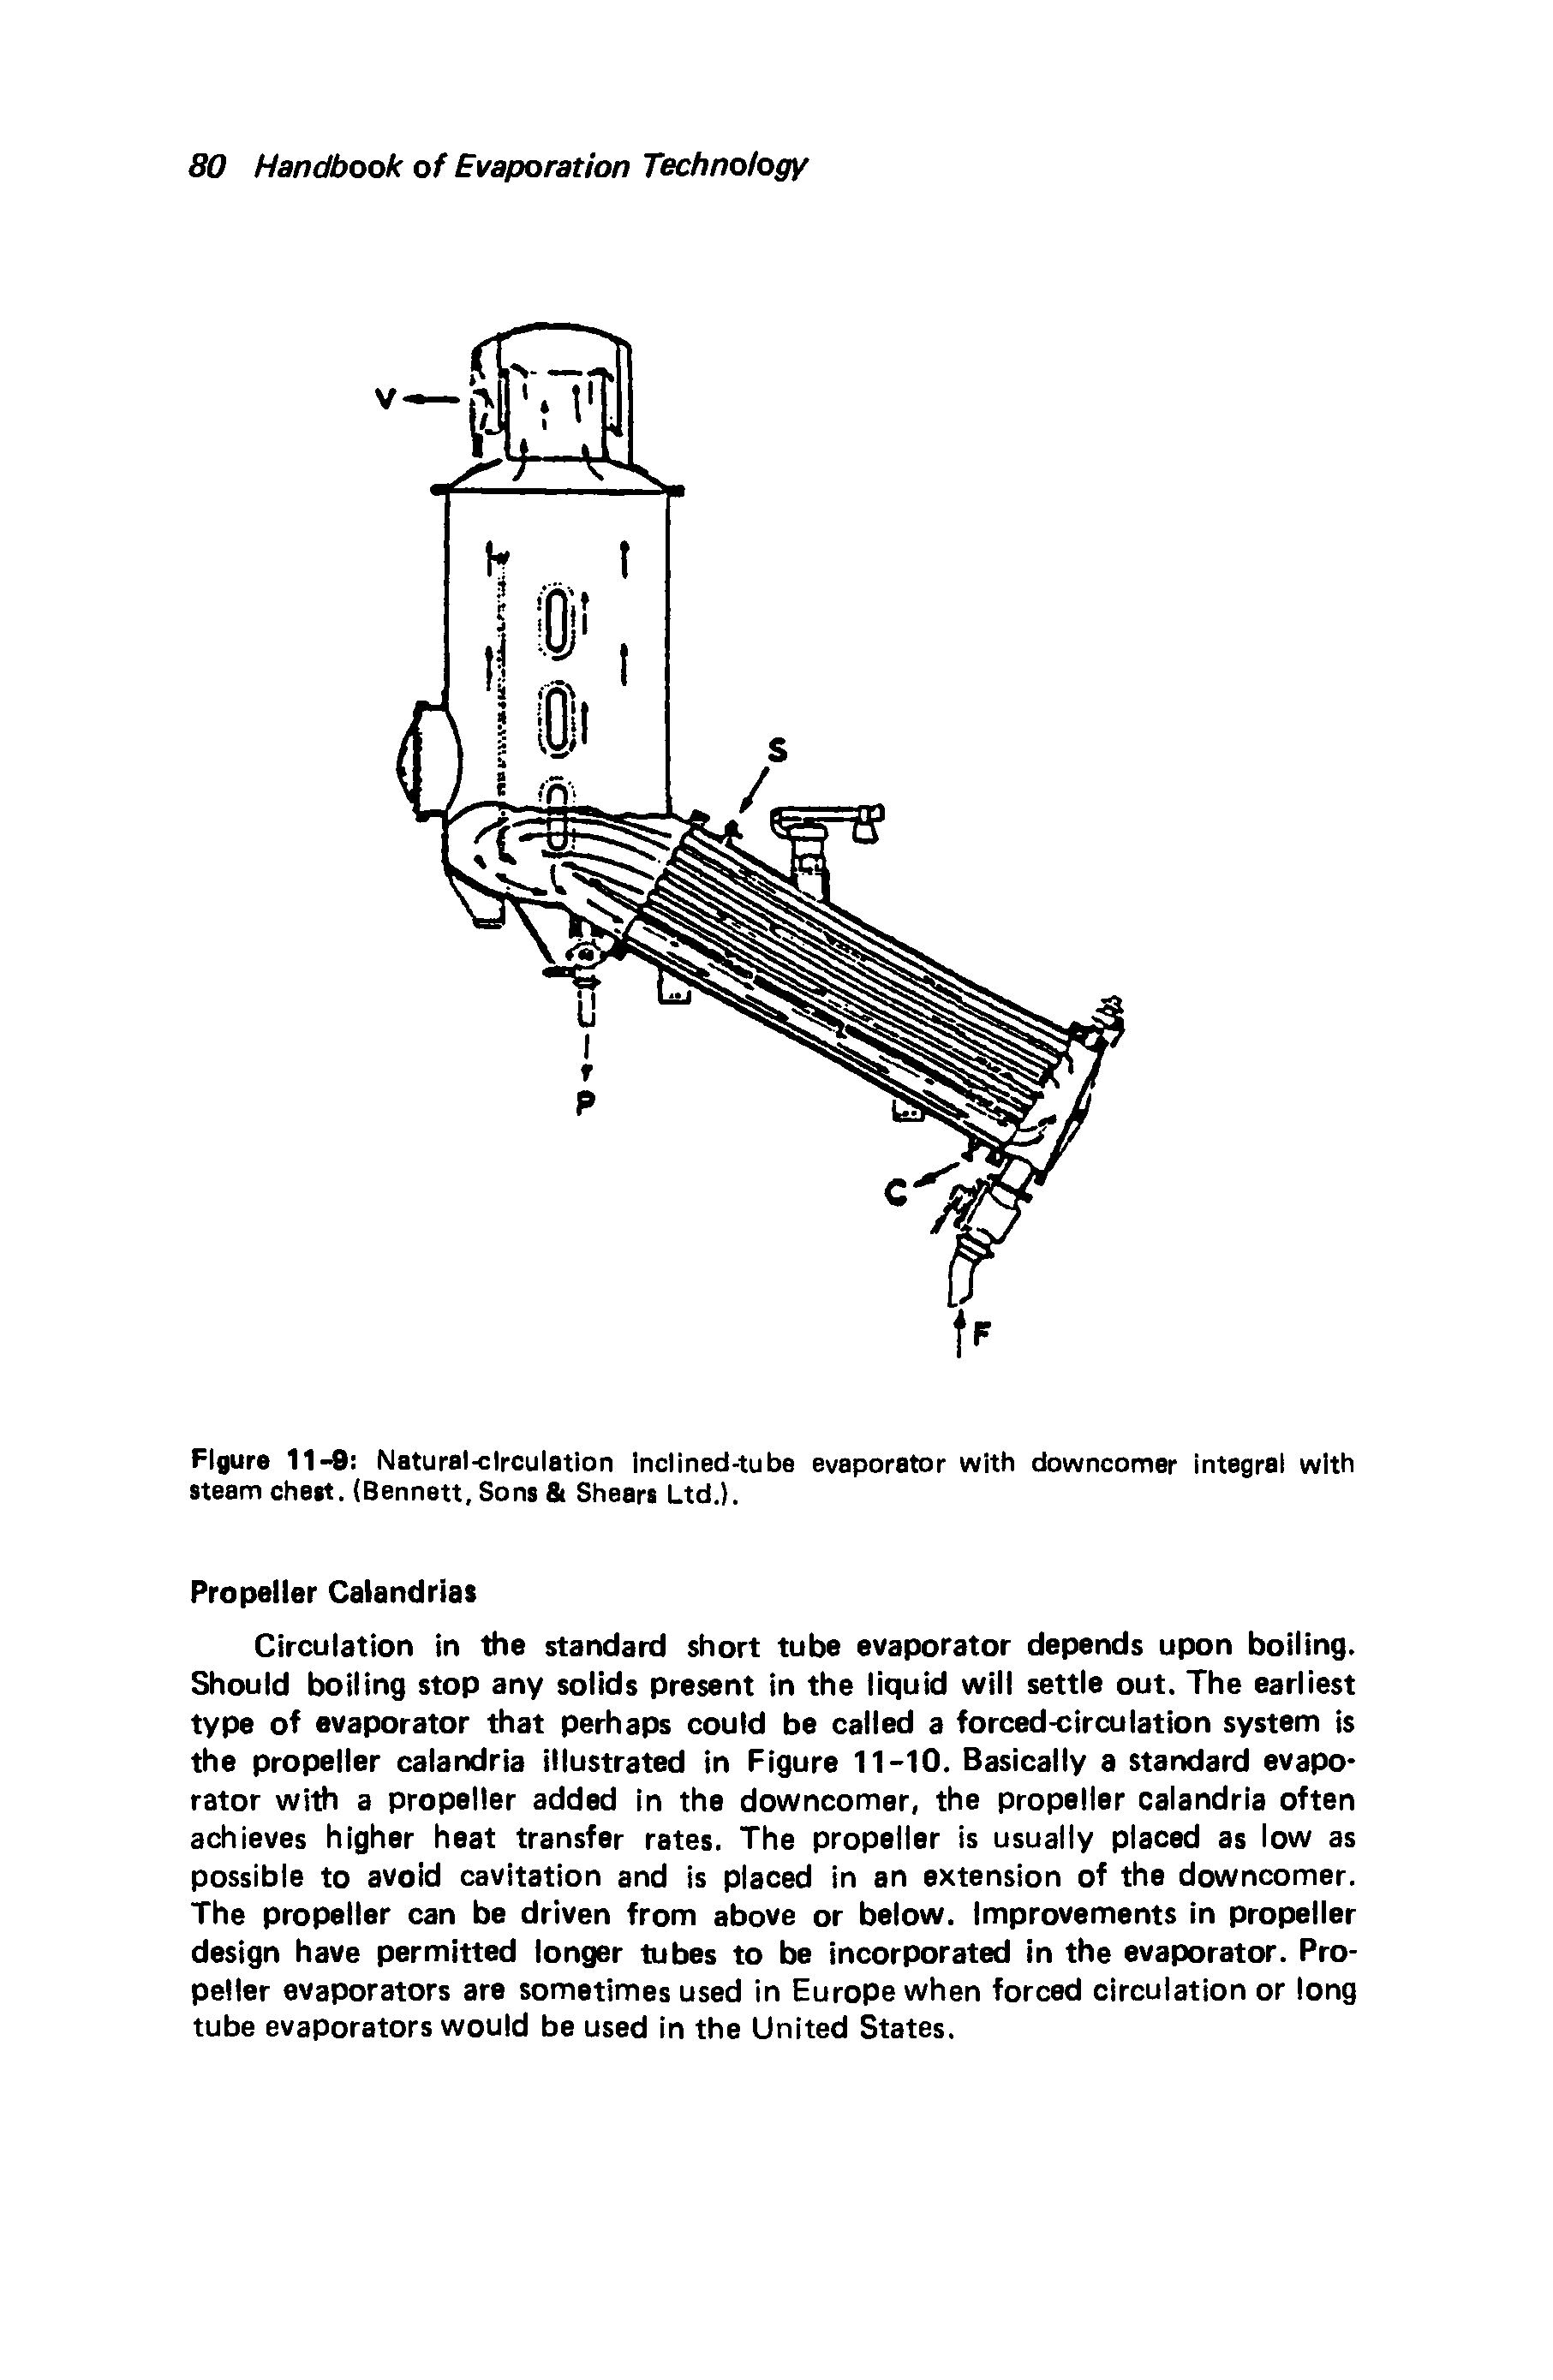 Figure 11-9 Natural-circulation Inclined-tube evaporator with downcomer integrel with steam chest. (Bennett, Sons Shears Ltd.).